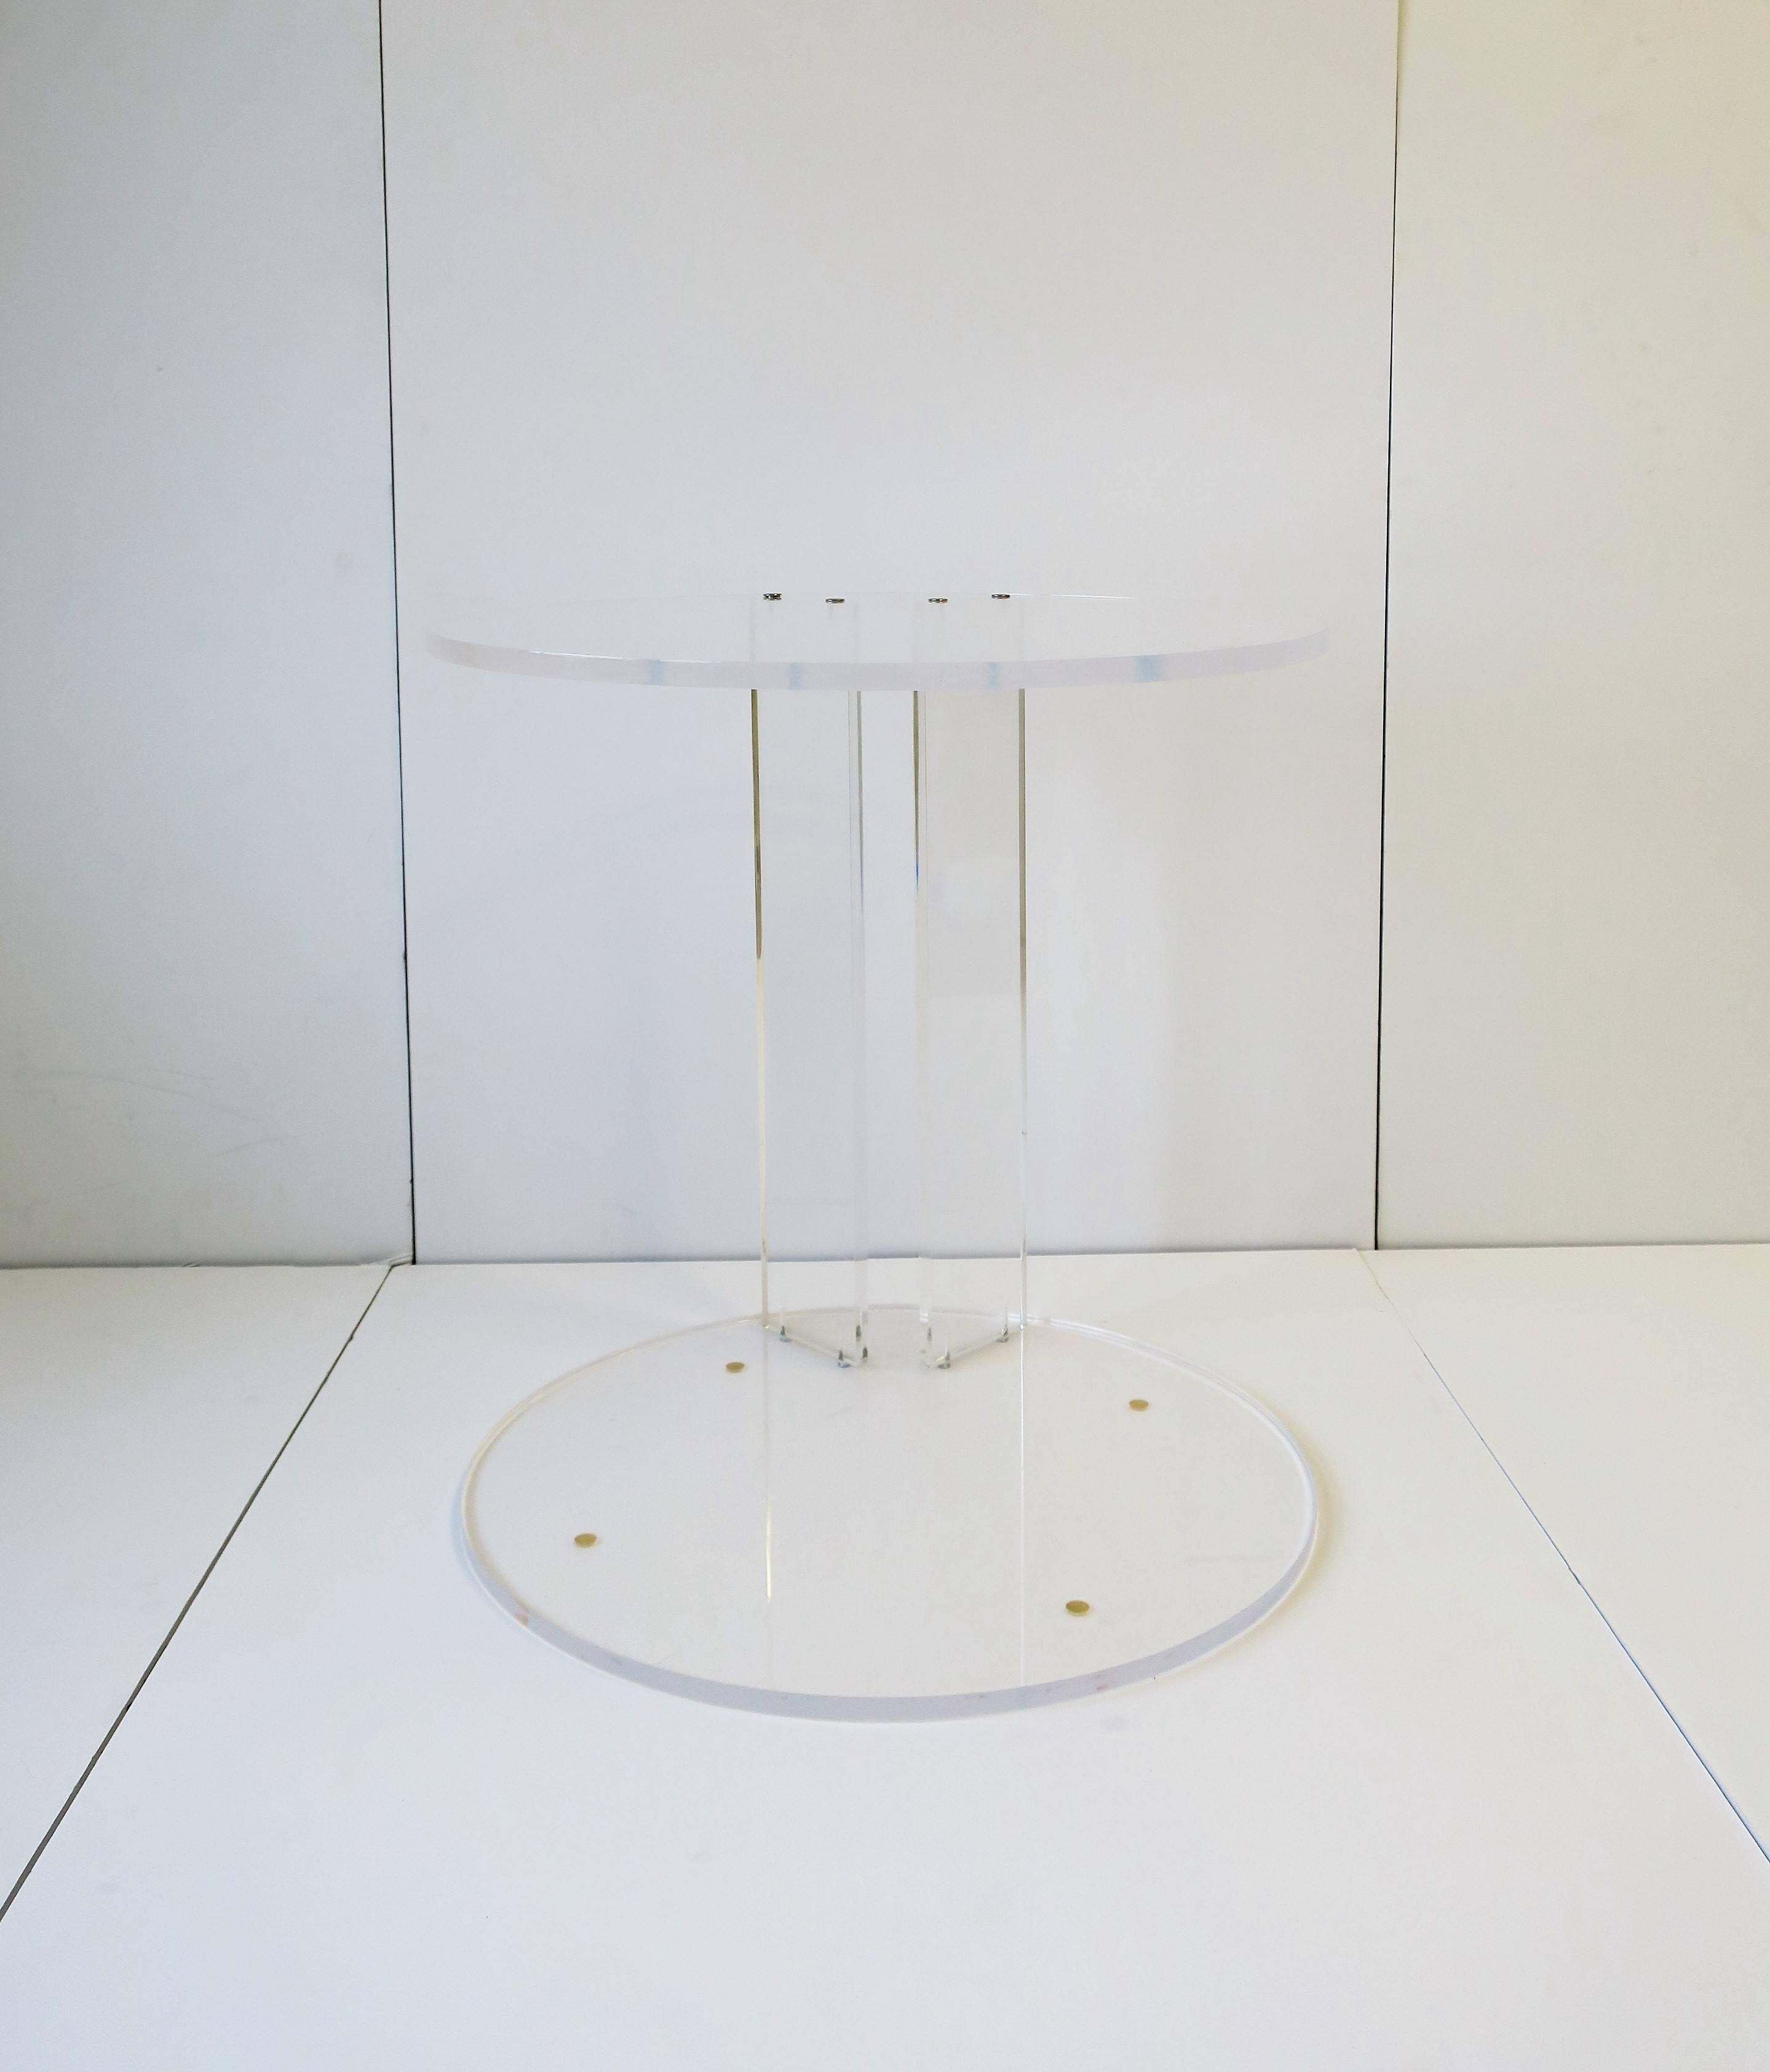 A Post-Modern [Postmodern] or Modern style Lucite/acrylic round side table or end table. Lucite measures 1/2 inch thick. Table can work as a side table or end table. Base area can be left bare or can be used to hold/display books, a plant, etc., as